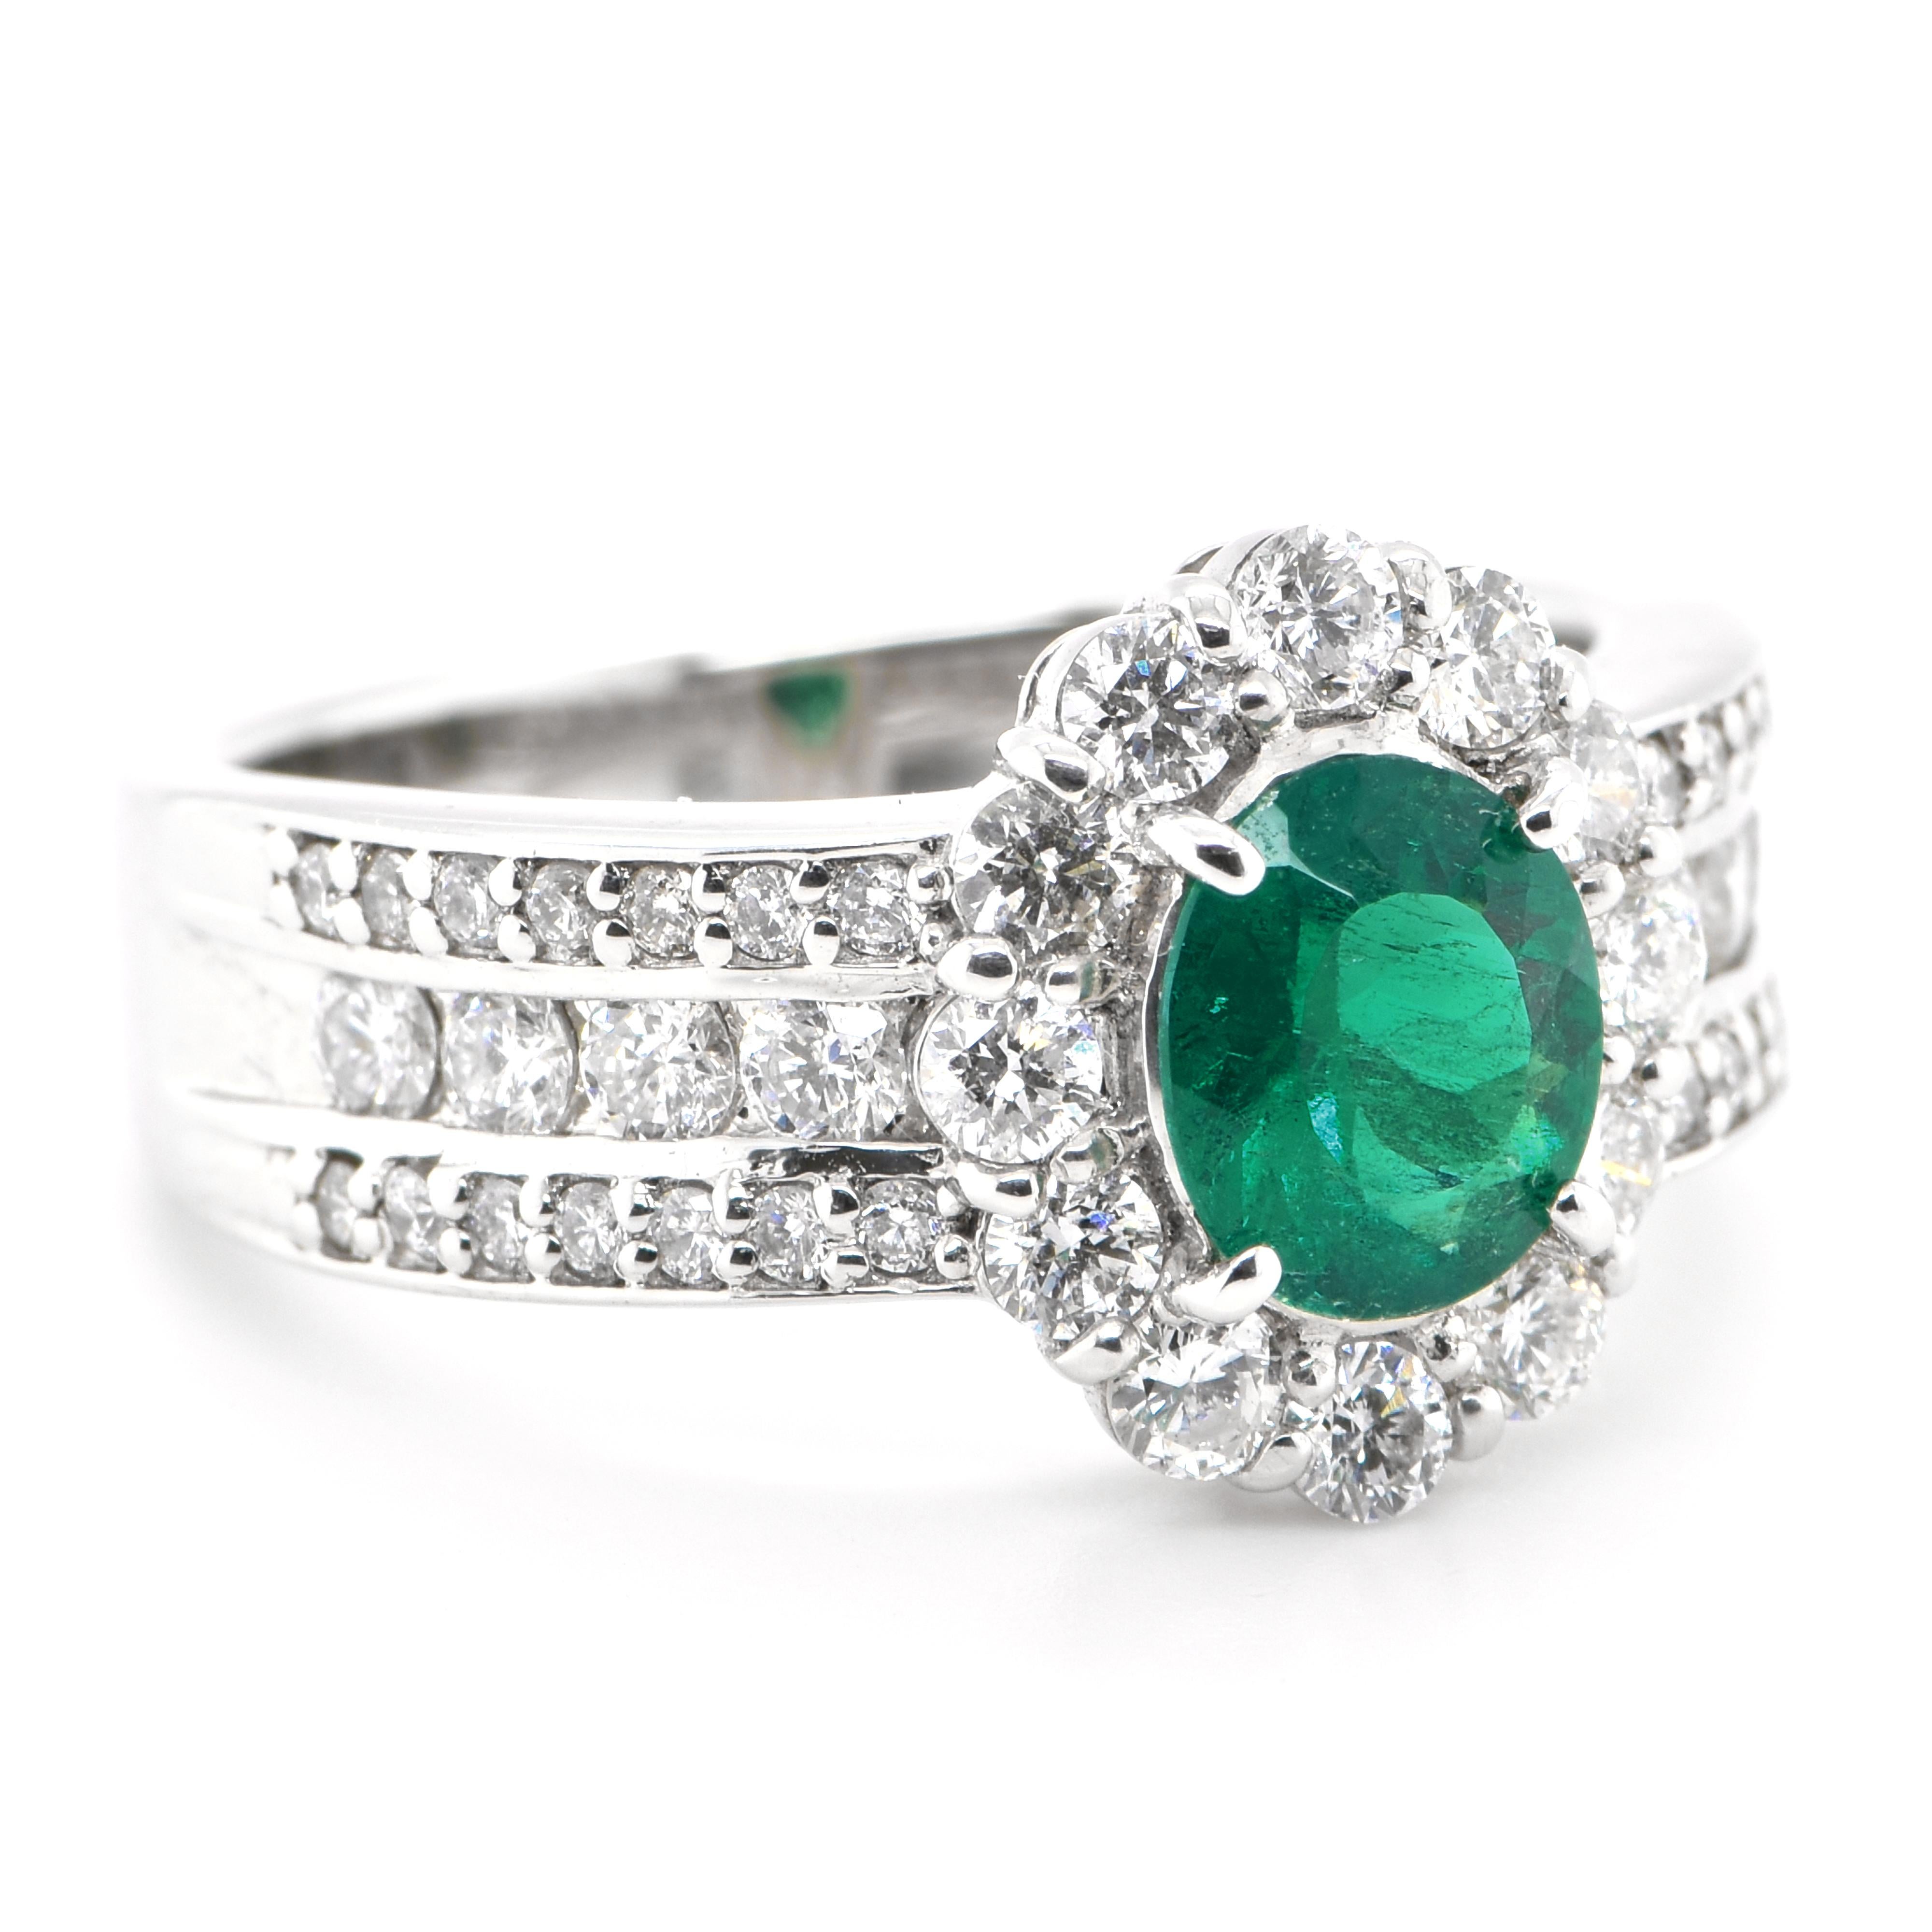 Modern 0.74 Carat Natural Untreated 'No-Oil' Emerald and Diamond Ring Set in Platinum